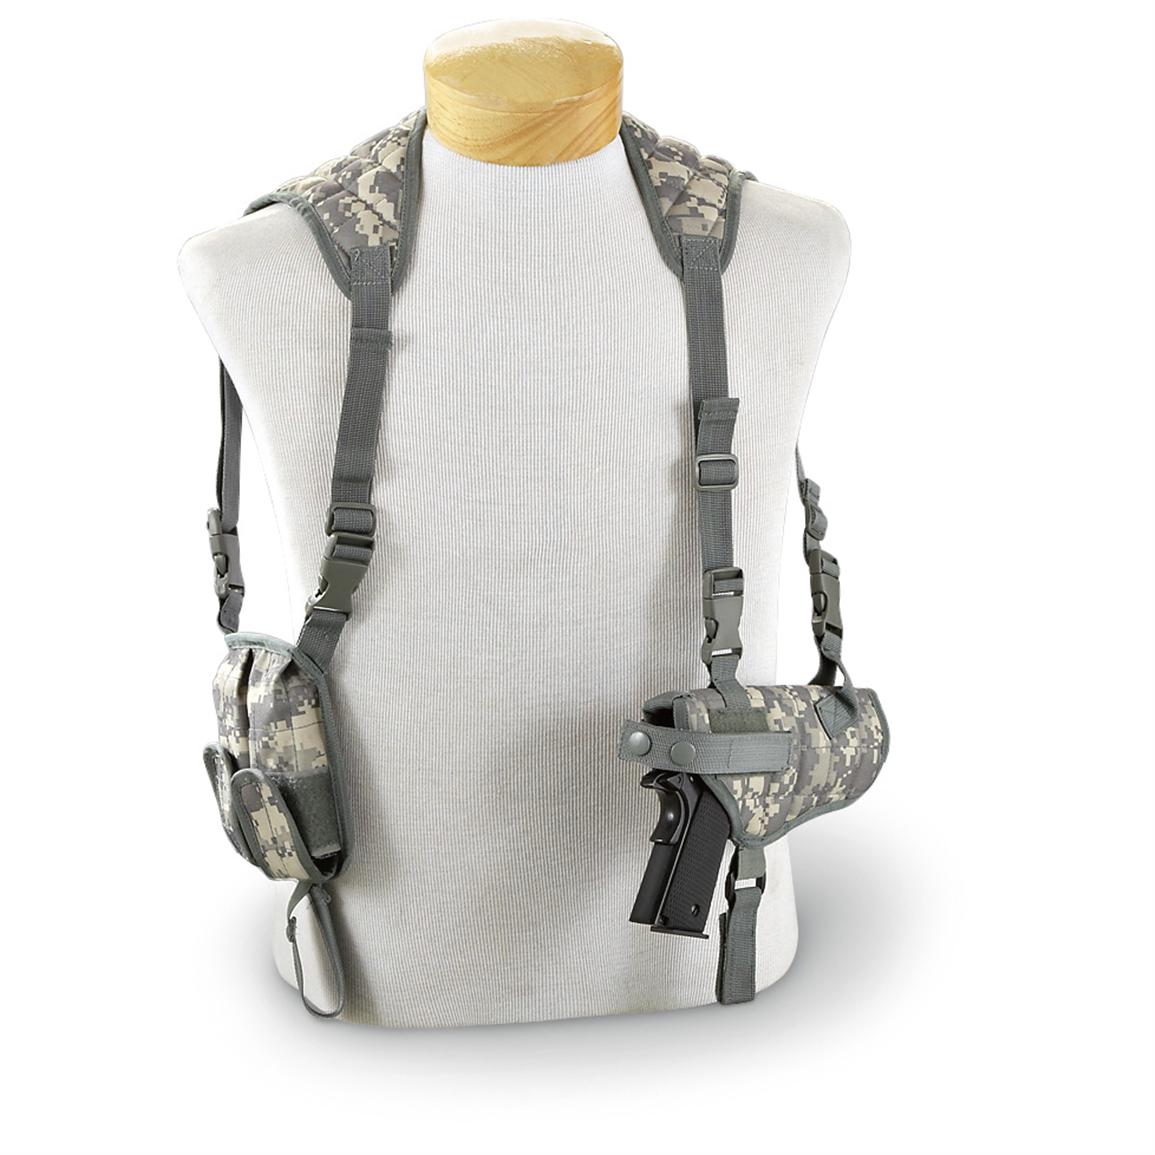 NEW Fox Outdoor 58-370 Advanced Tactical Shoulder Holster One size fits all 